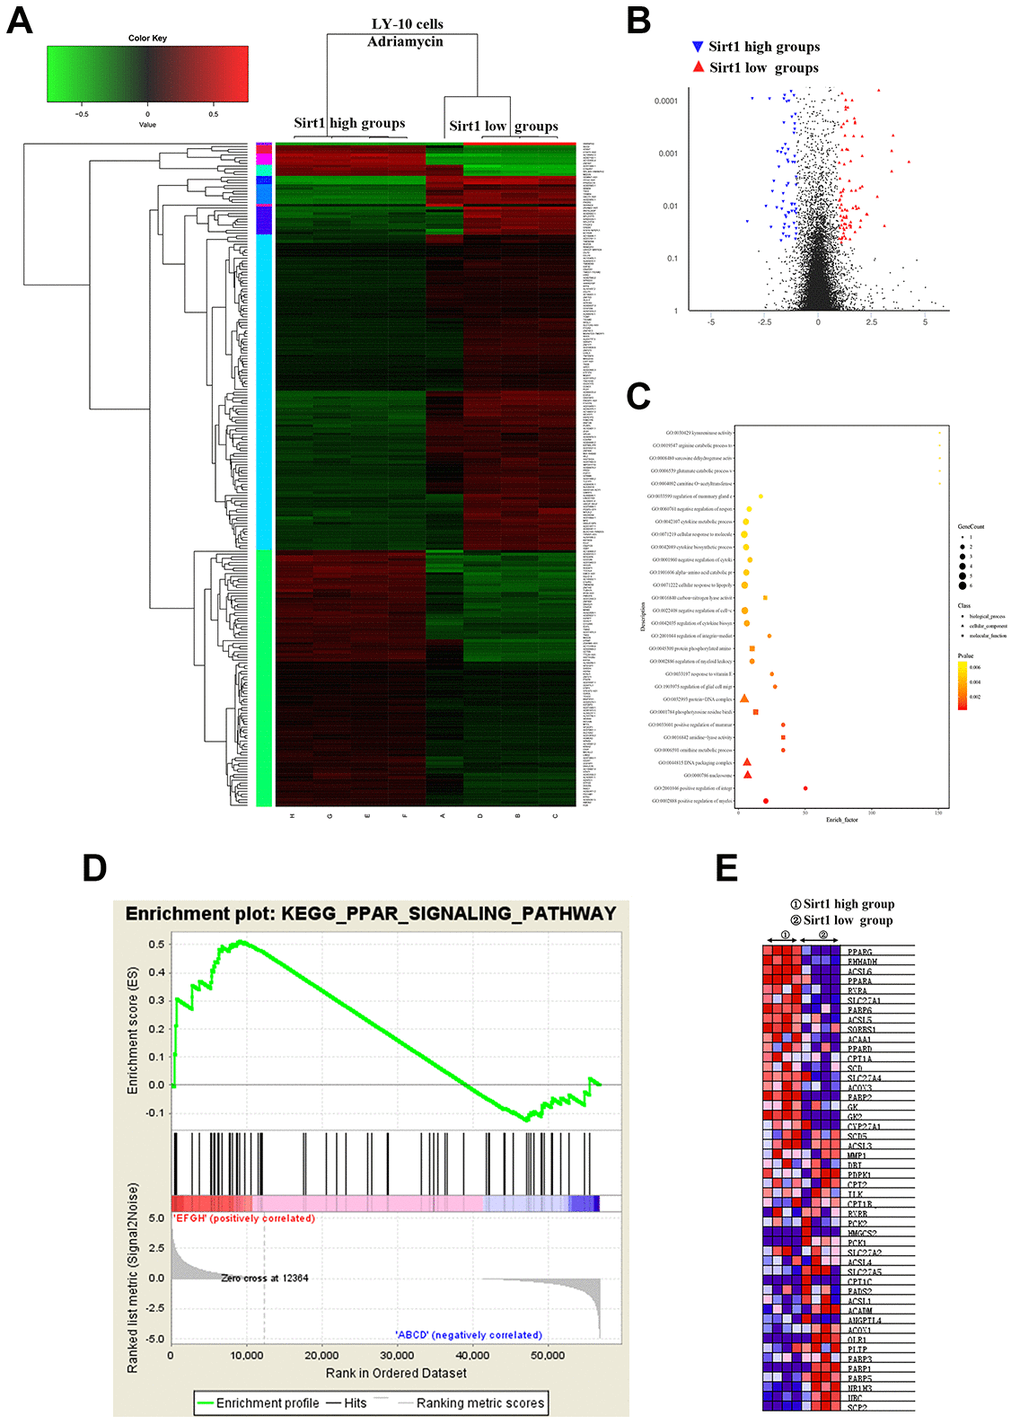 Differences in genes and pathways analyzed using bioinformatics in the Sirt1-high and Sirt1-low group of LY-10 cells. (A) High-throughput sequencing was used to detect differences in the transcriptional levels of LY-10 cells in the Sirt1-high and Sirt1-low groups. The cluster of differentially expressed genes between the Sirt1-high and Sirt1-low groups. (B) The volcano map of transcriptome sequencing results. (C) Enrichment plots of the KEGG pathway analysis with the highest score and lowest p value for the Enrichment score. (D) The PPAR signaling pathway was analyzed using GSEA assays in the Sirt1-high and Sirt1-low groups. (E) Cytokines associated with the PPAR signaling pathway in the Sirt1-high and Sirt1-low groups.